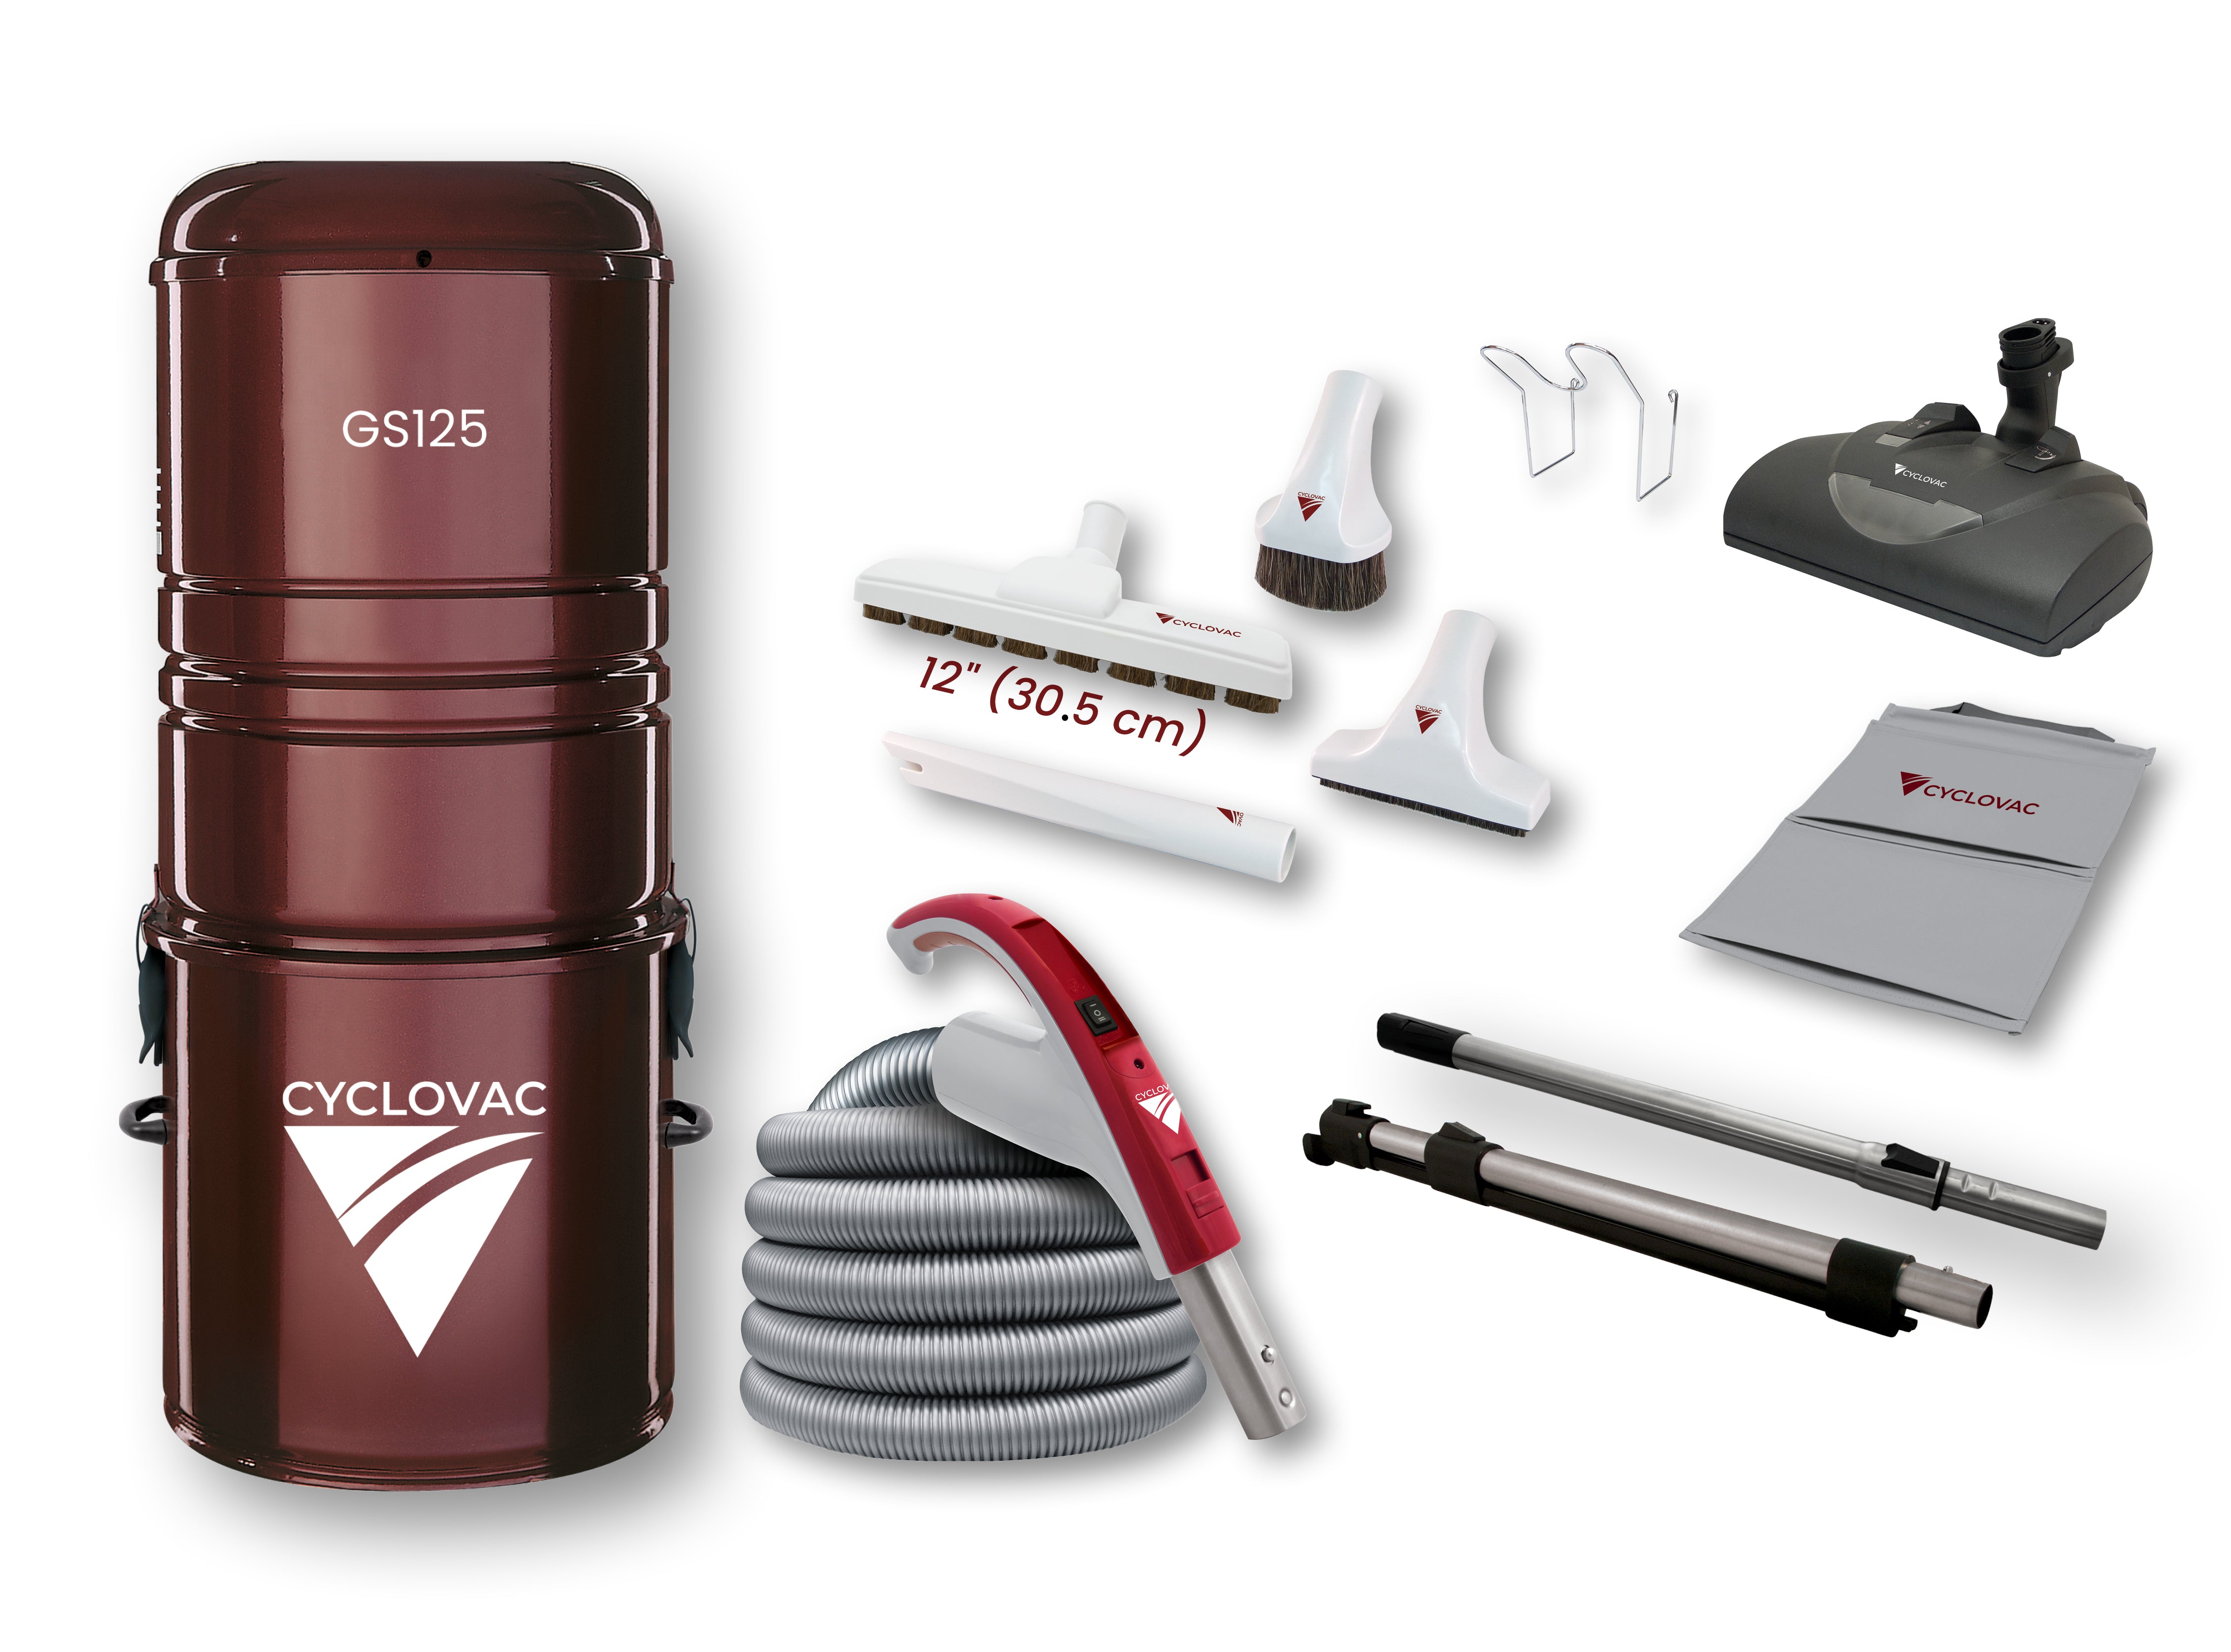 Cyclovac GS125 Central Vacuum Cleaner with Wessel Werk EBK360 Accessory Kit